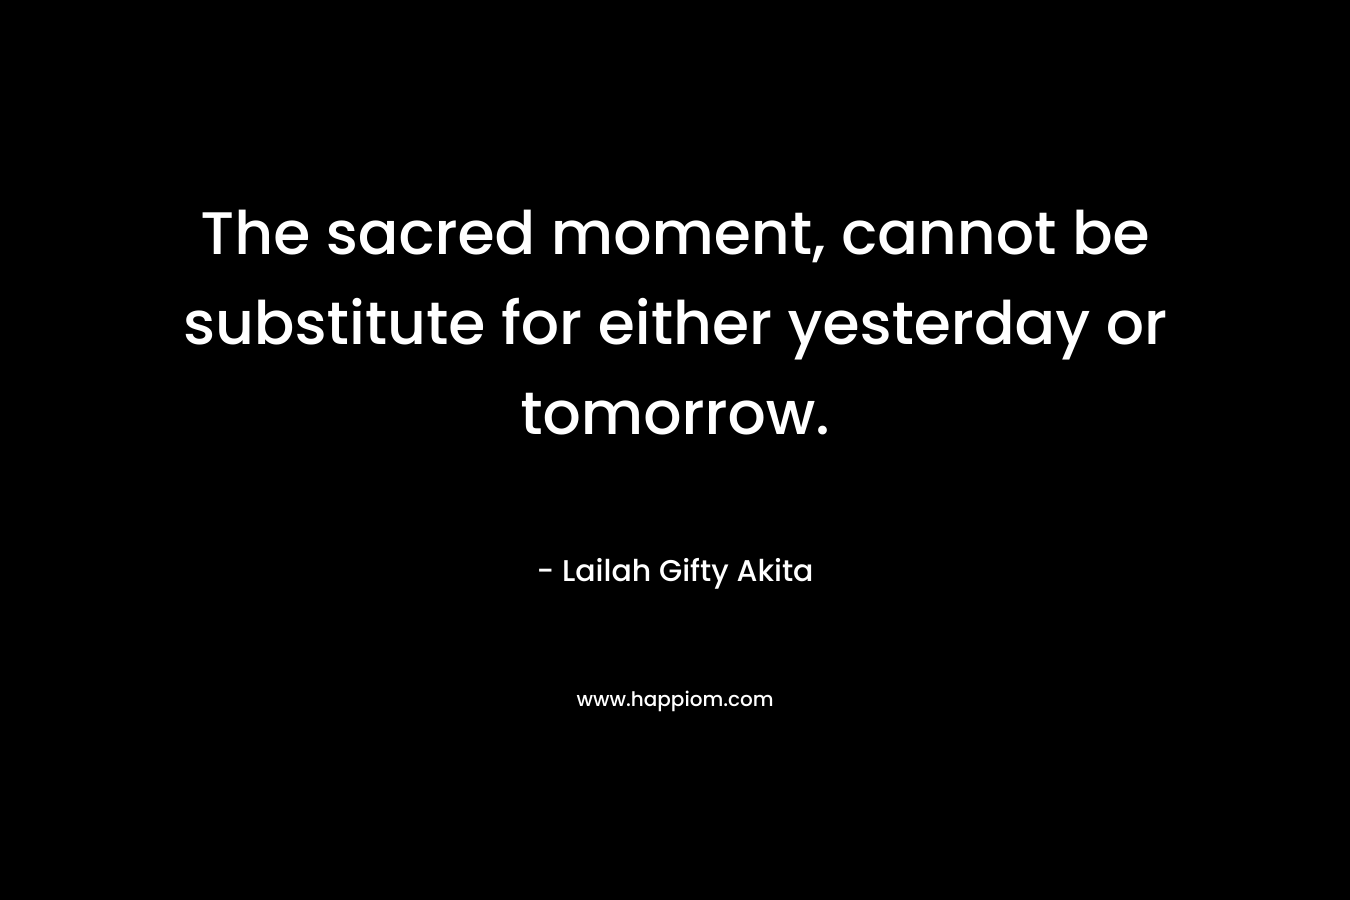 The sacred moment, cannot be substitute for either yesterday or tomorrow. – Lailah Gifty Akita